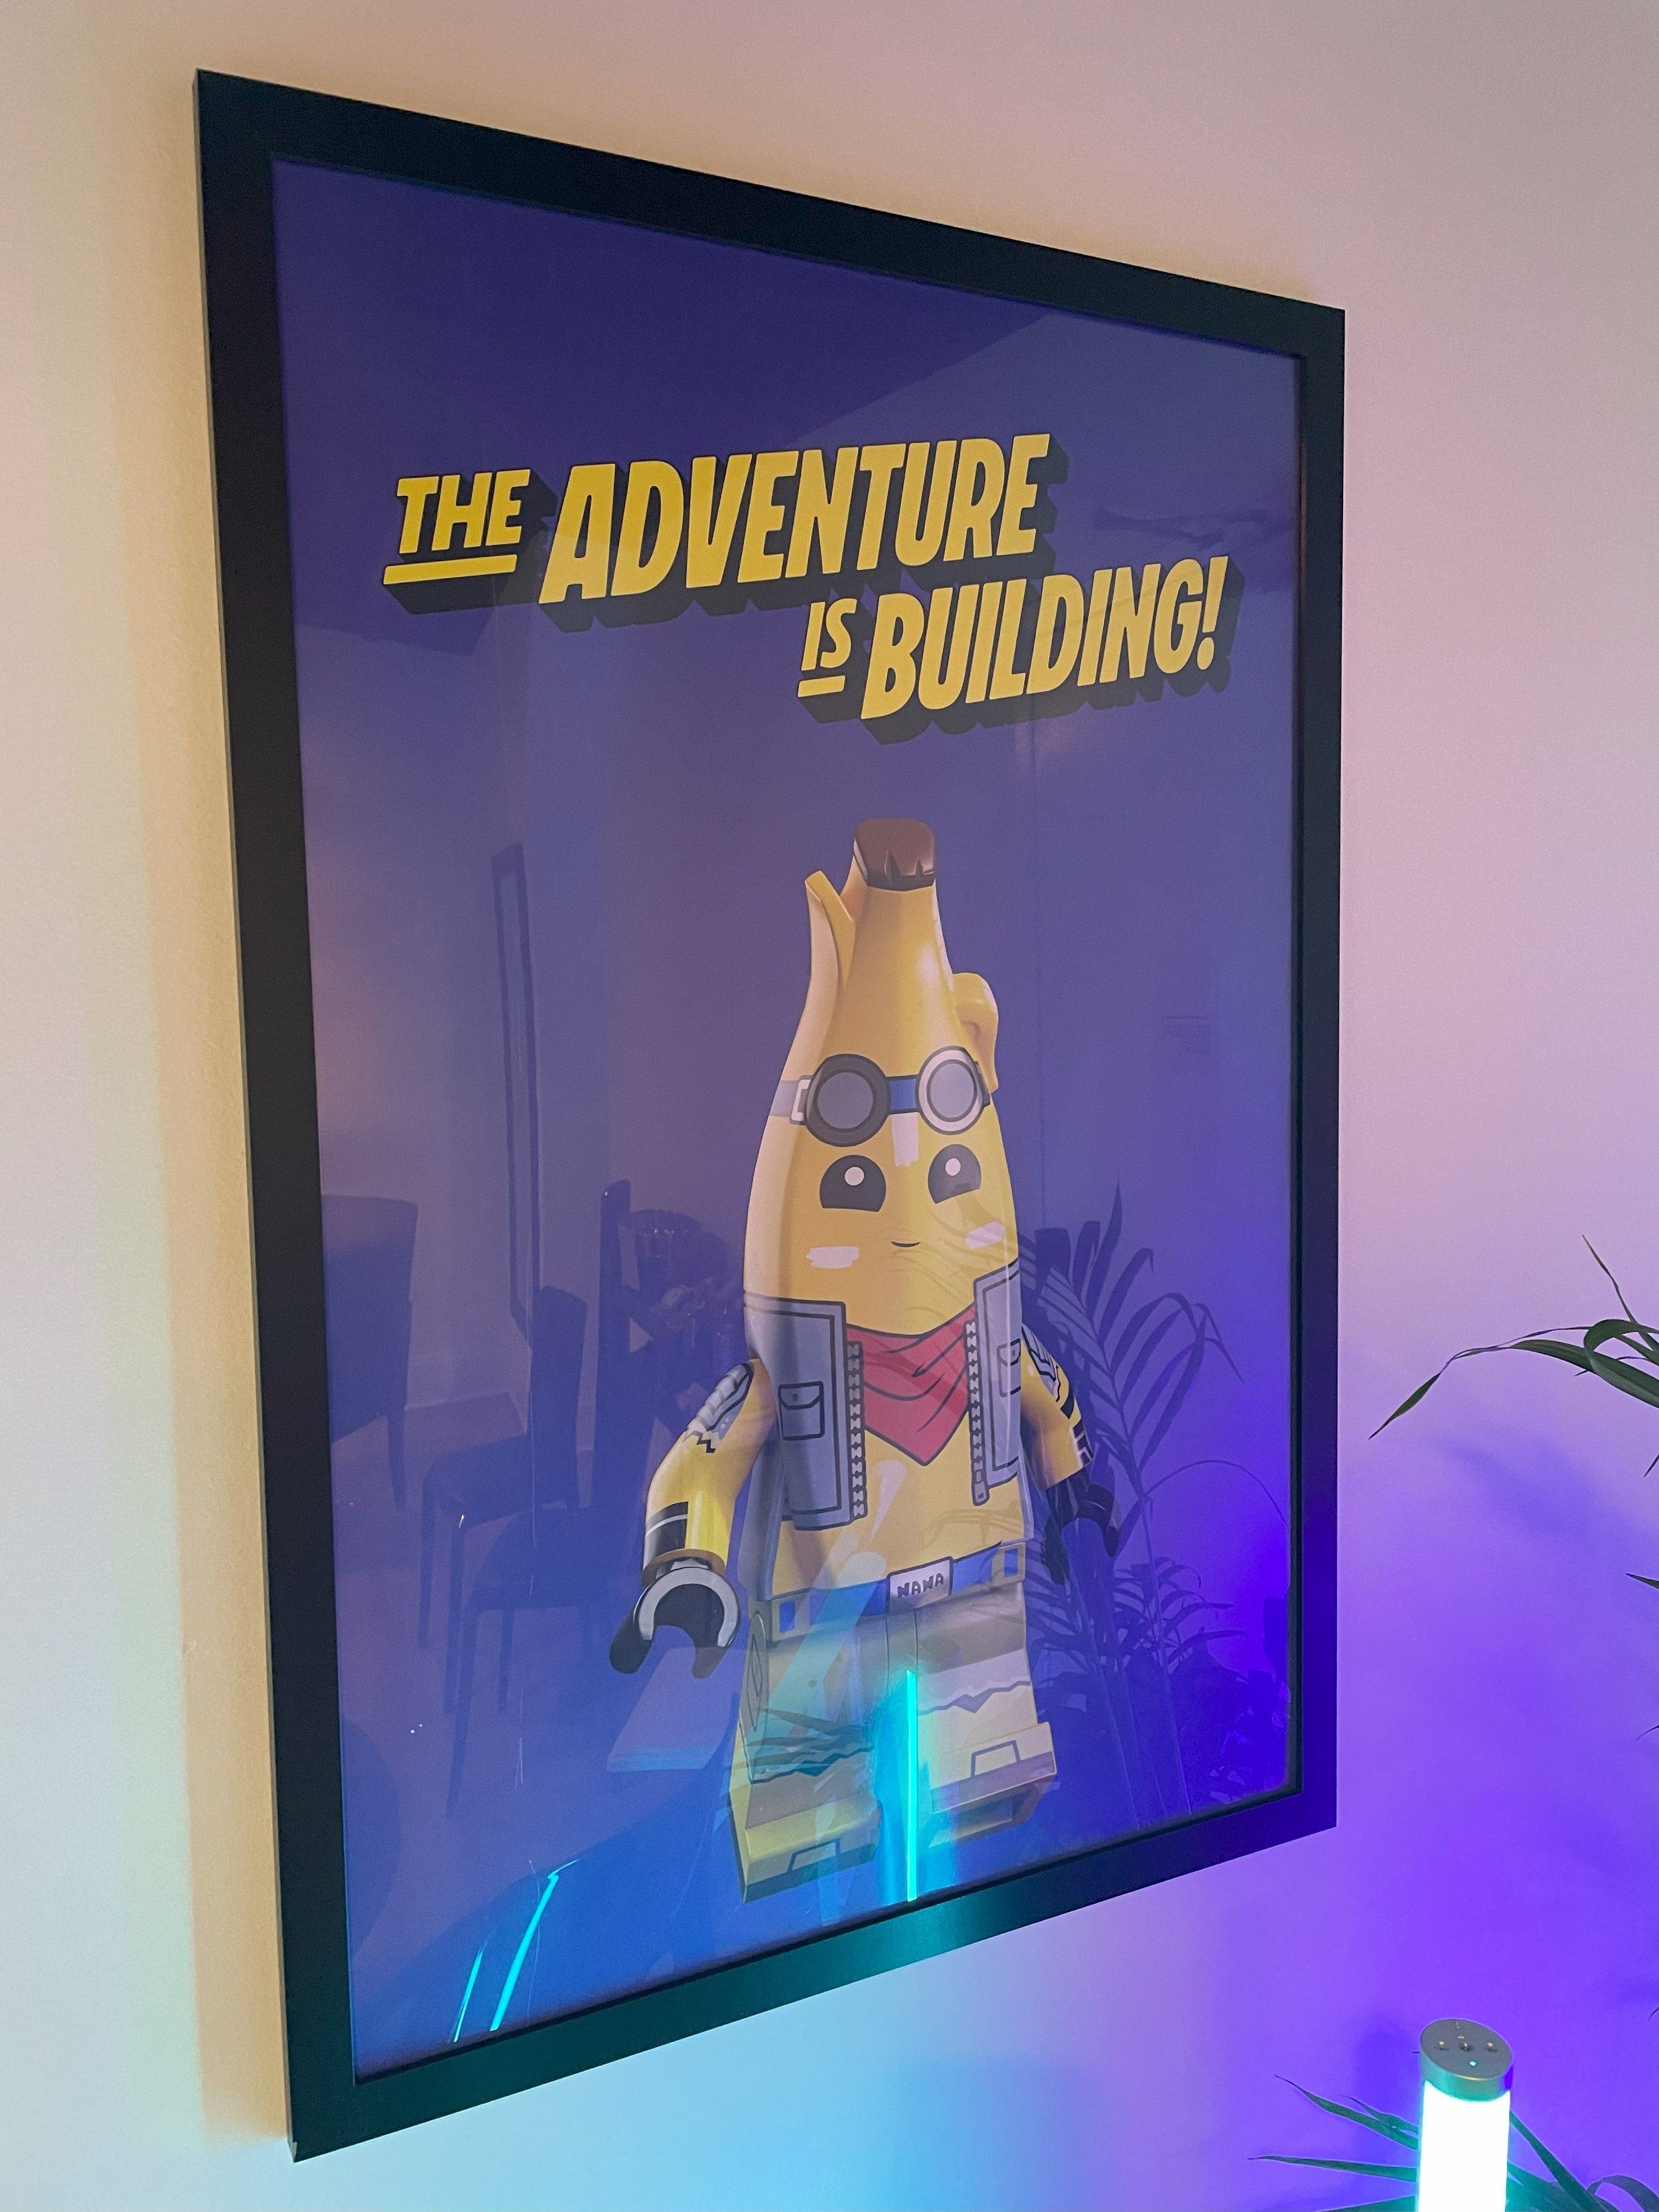 Lego Fortnite is first step towards Epic and Lego's kid-friendly metaverse